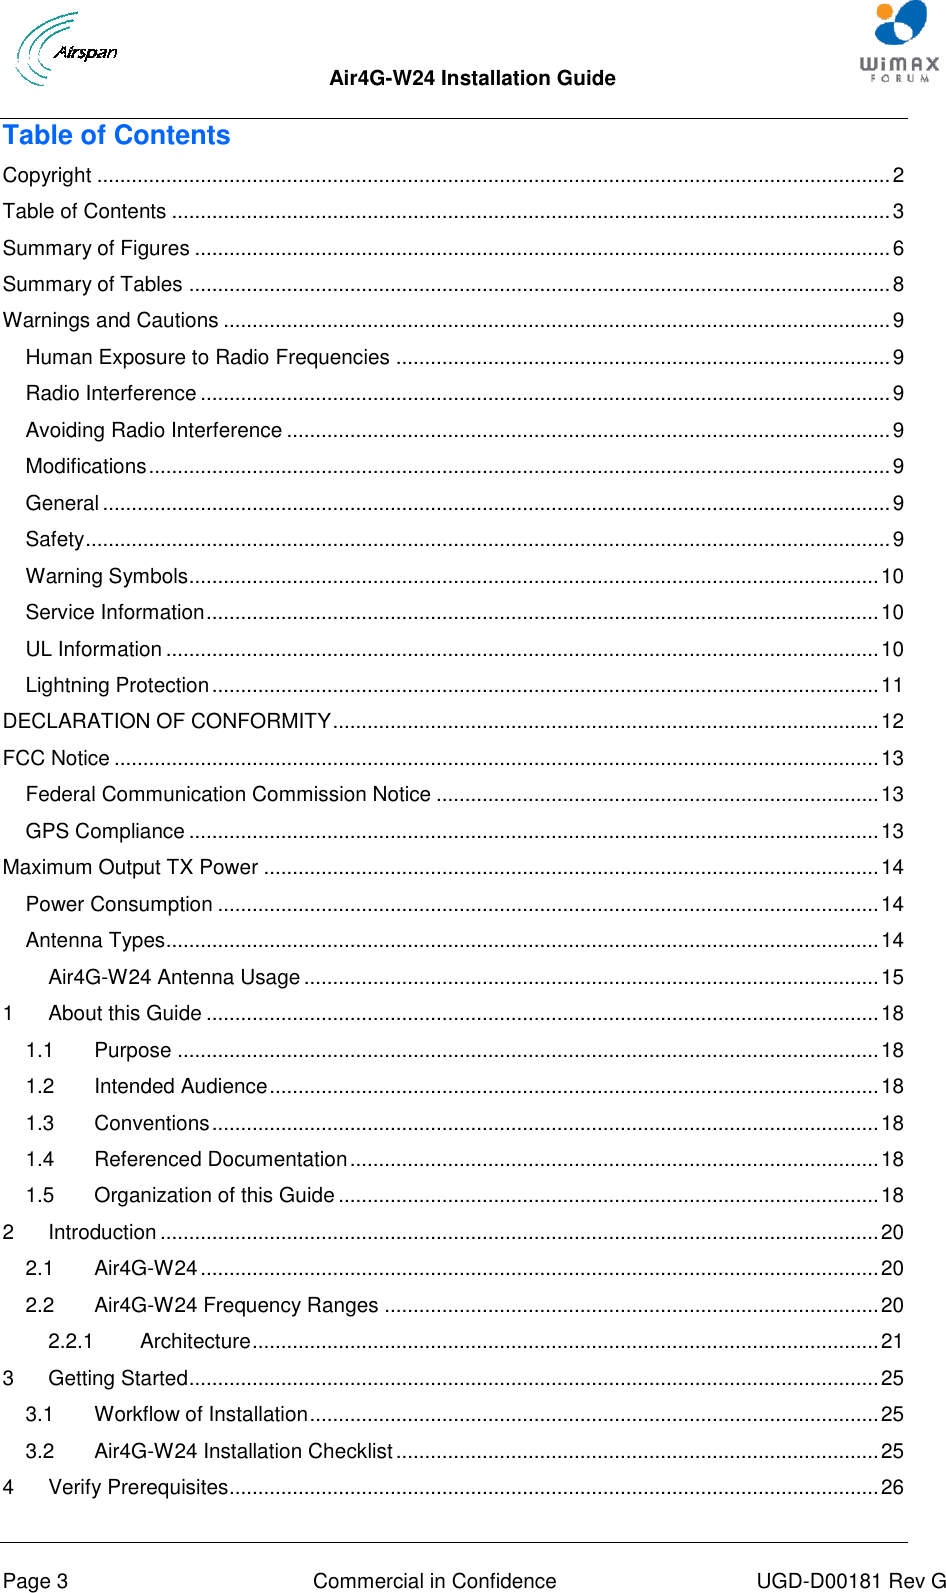  Air4G-W24 Installation Guide     Page 3  Commercial in Confidence  UGD-D00181 Rev G Table of Contents Copyright .......................................................................................................................................... 2 Table of Contents ............................................................................................................................. 3 Summary of Figures ......................................................................................................................... 6 Summary of Tables .......................................................................................................................... 8 Warnings and Cautions .................................................................................................................... 9 Human Exposure to Radio Frequencies ...................................................................................... 9 Radio Interference ........................................................................................................................ 9 Avoiding Radio Interference ......................................................................................................... 9 Modifications ................................................................................................................................. 9 General ......................................................................................................................................... 9 Safety ............................................................................................................................................ 9 Warning Symbols........................................................................................................................ 10 Service Information ..................................................................................................................... 10 UL Information ............................................................................................................................ 10 Lightning Protection .................................................................................................................... 11 DECLARATION OF CONFORMITY ............................................................................................... 12 FCC Notice ..................................................................................................................................... 13 Federal Communication Commission Notice ............................................................................. 13 GPS Compliance ........................................................................................................................ 13 Maximum Output TX Power ........................................................................................................... 14 Power Consumption ................................................................................................................... 14 Antenna Types............................................................................................................................ 14 Air4G-W24 Antenna Usage .................................................................................................... 15 1 About this Guide ..................................................................................................................... 18 1.1 Purpose .......................................................................................................................... 18 1.2 Intended Audience .......................................................................................................... 18 1.3 Conventions .................................................................................................................... 18 1.4 Referenced Documentation ............................................................................................ 18 1.5 Organization of this Guide .............................................................................................. 18 2 Introduction ............................................................................................................................. 20 2.1 Air4G-W24 ...................................................................................................................... 20 2.2 Air4G-W24 Frequency Ranges ...................................................................................... 20 2.2.1 Architecture ............................................................................................................. 21 3 Getting Started ........................................................................................................................ 25 3.1 Workflow of Installation ................................................................................................... 25 3.2 Air4G-W24 Installation Checklist .................................................................................... 25 4 Verify Prerequisites................................................................................................................. 26 